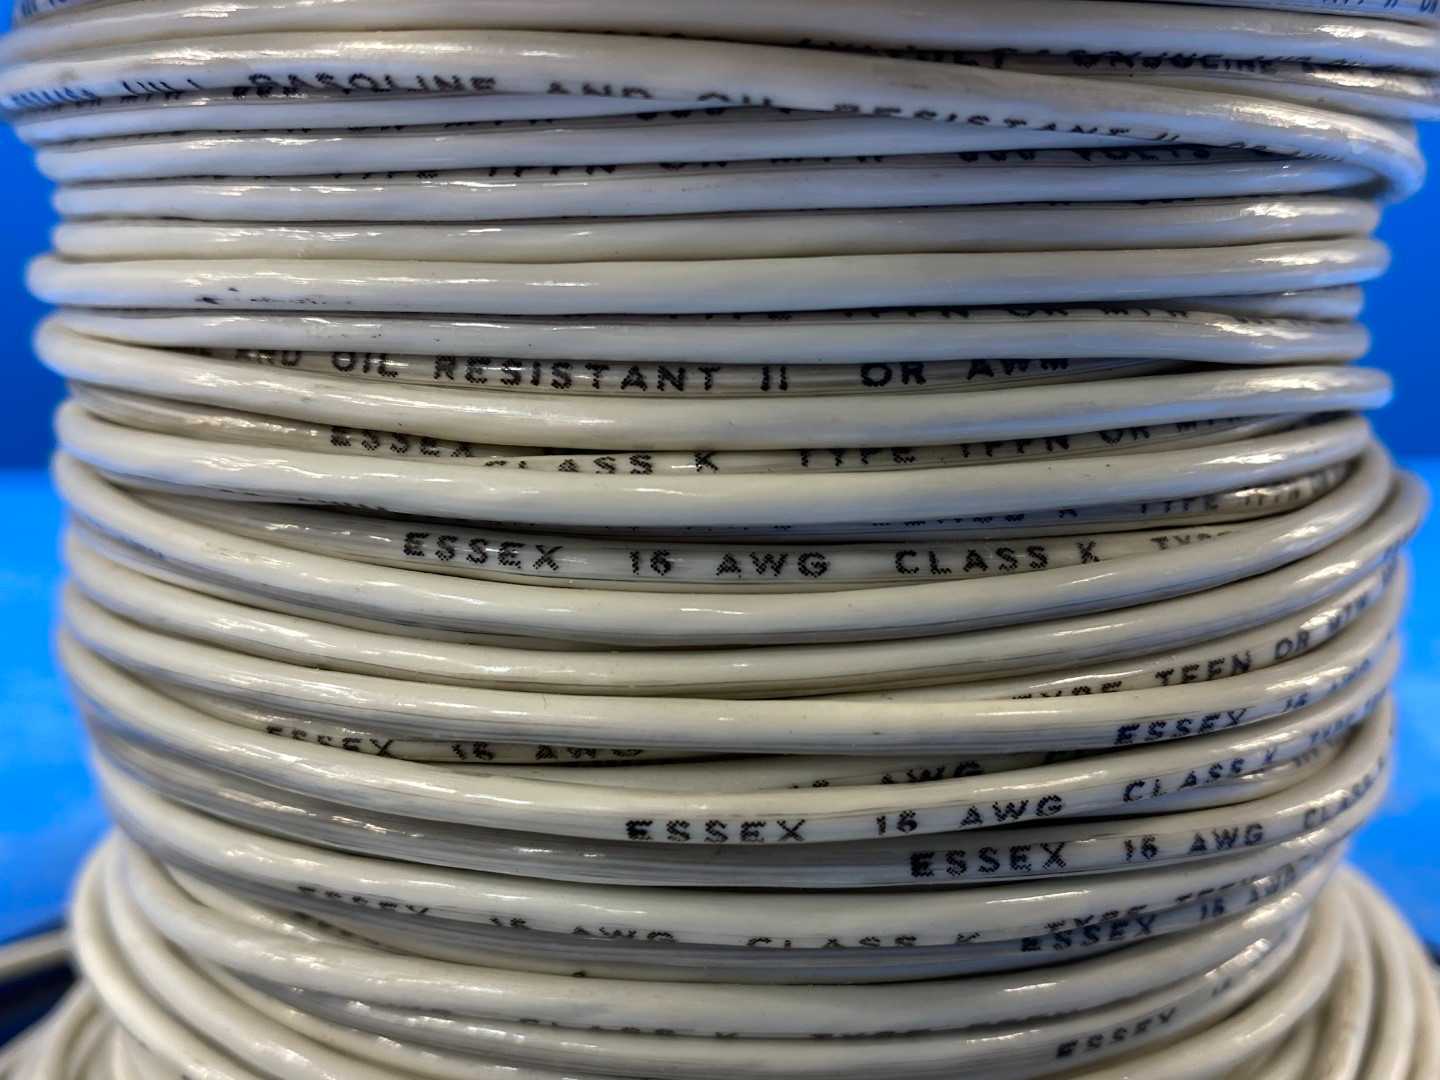 16 AWG Essex White Copper Wire Class K Type TFFN or MTW 240FT